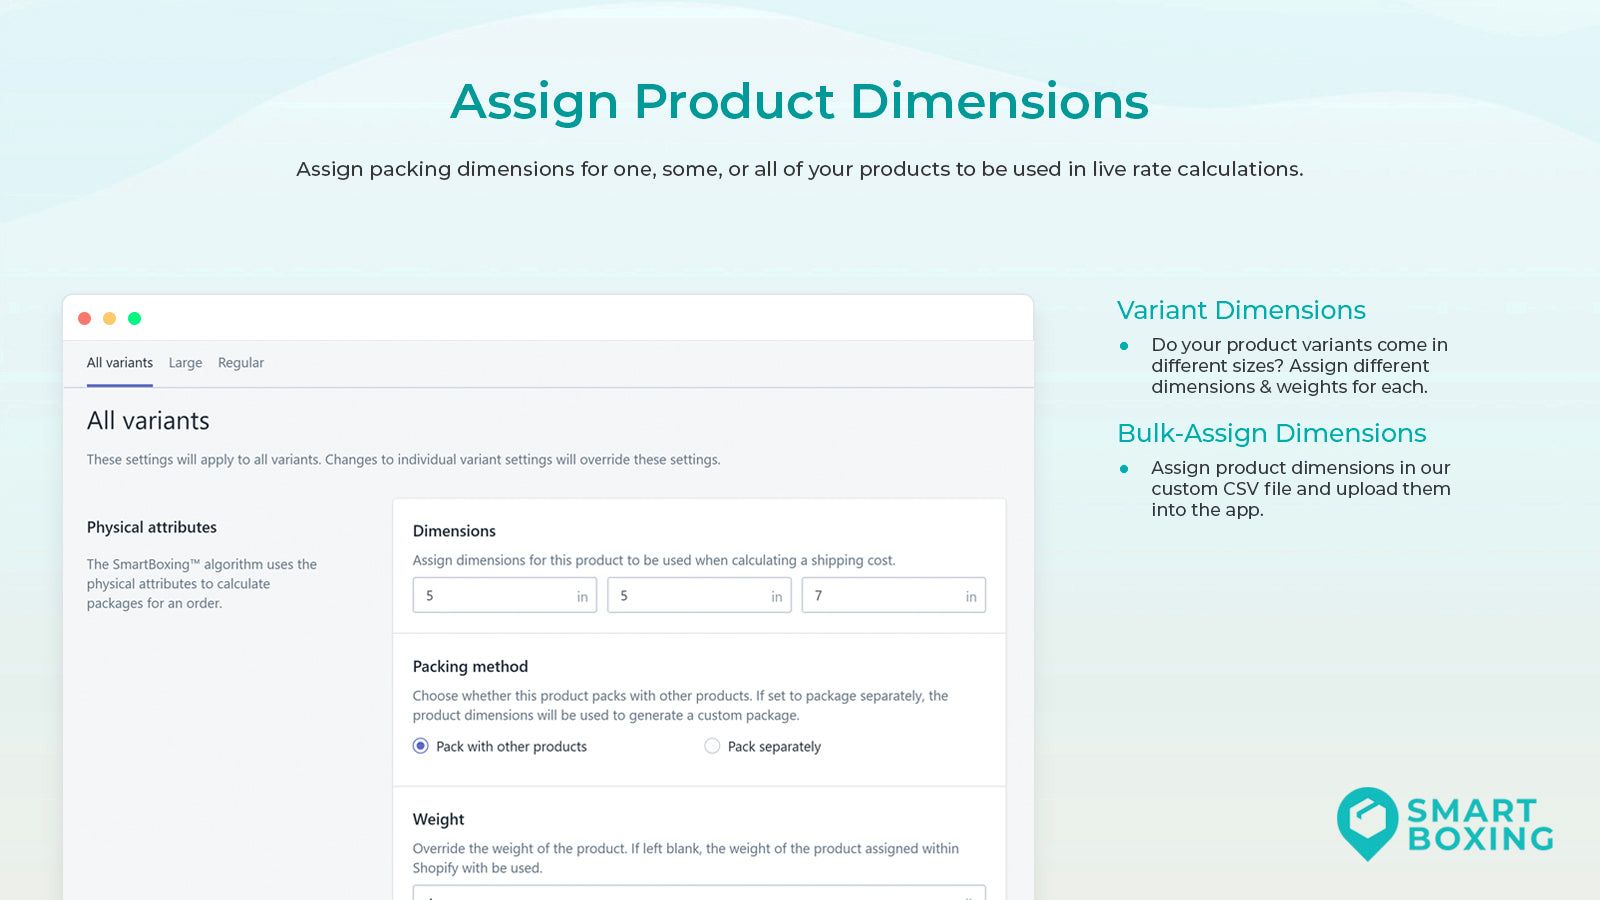 Assign product dimensions for volumetric rates at checkout